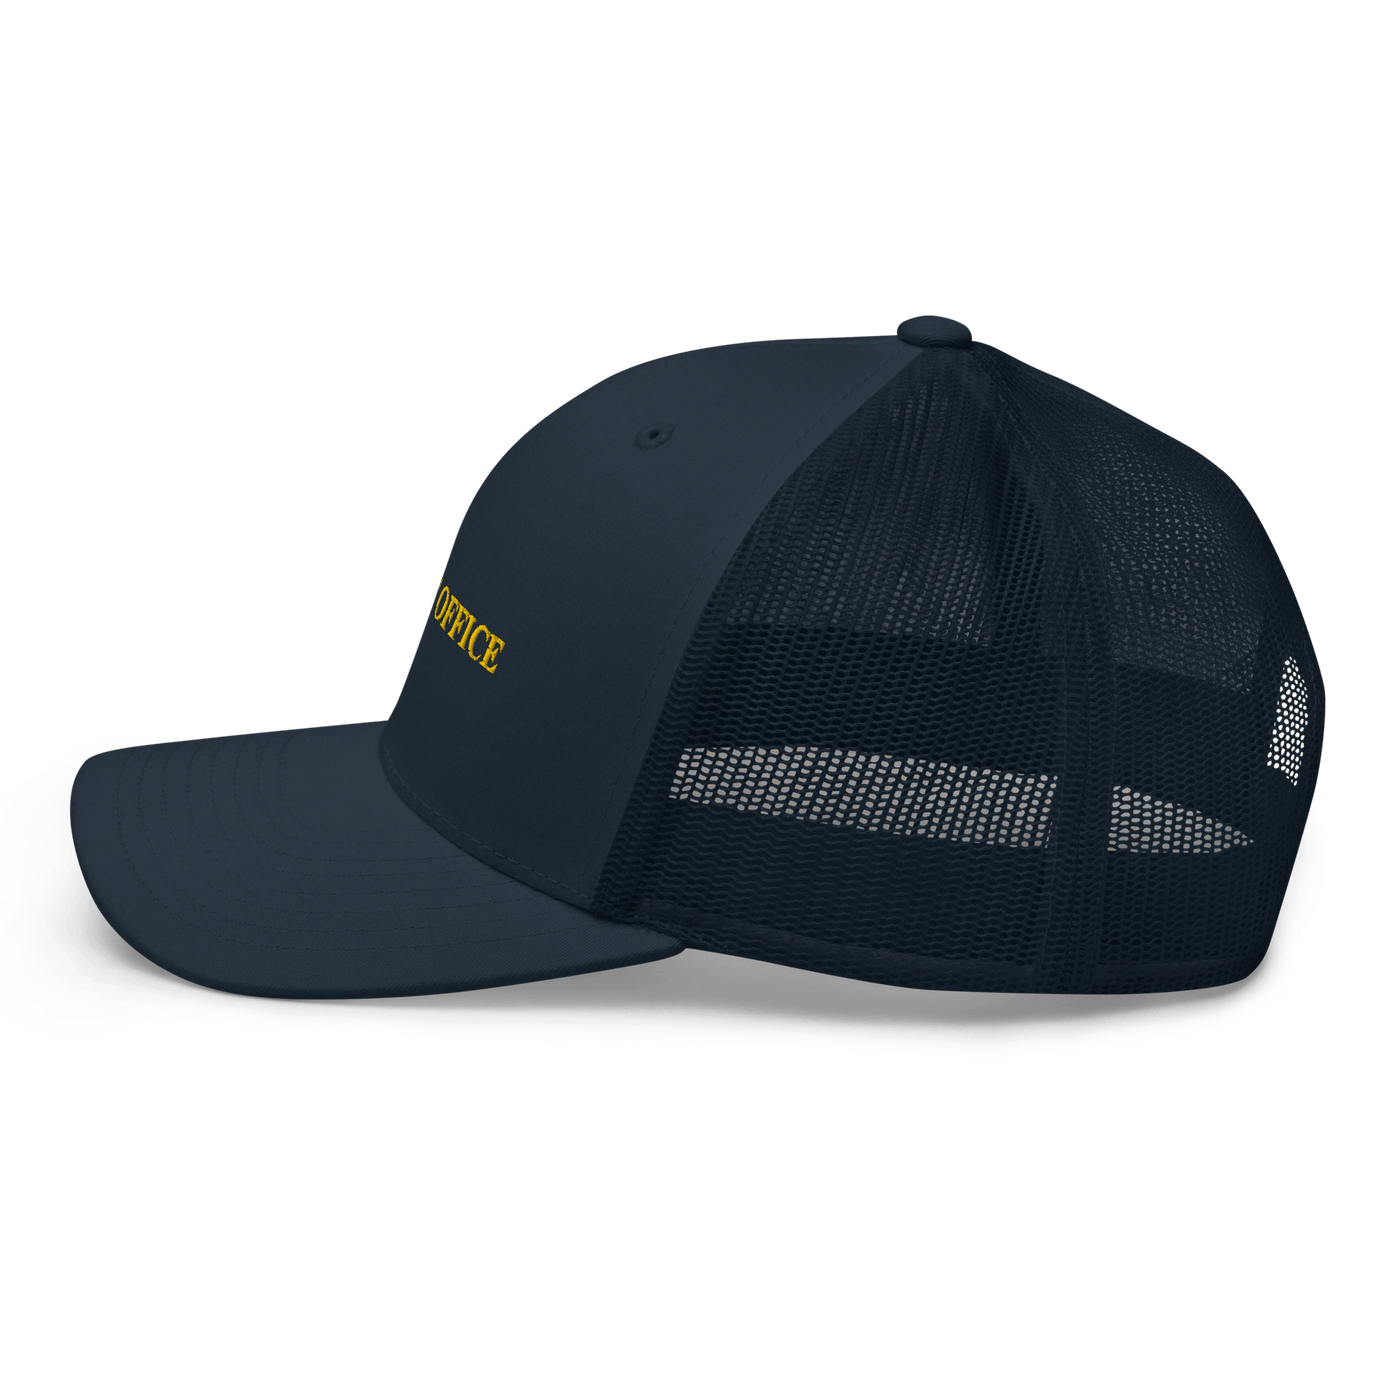 OUT OF OFFICE Trucker Cap - Navy - - Just Another Cap Store